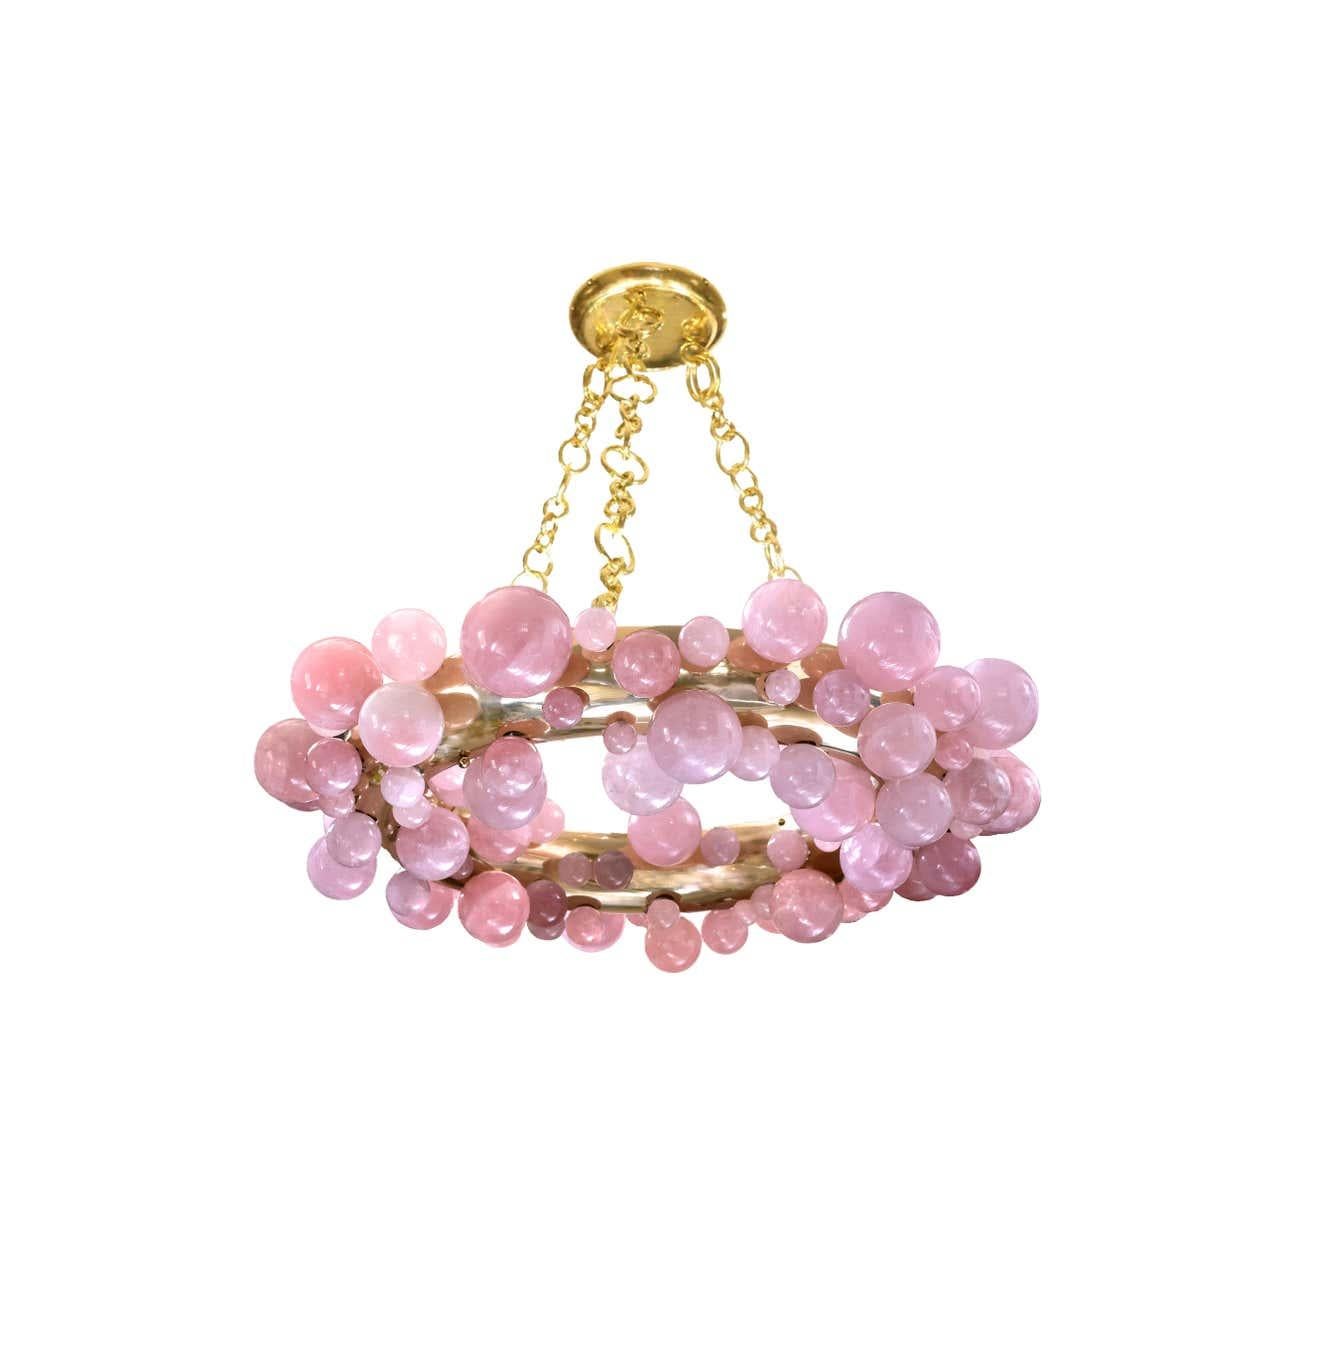 Pink bubble ring rock crystal chandelier by Phoenix with polish brass frame. 
Created by Phoenix Gallery, NYC.
Each chandelier install 10 sockets. Use 60w LED warm light bulbs. Total of 600w. 
Custom size and metal finish upon request.
     